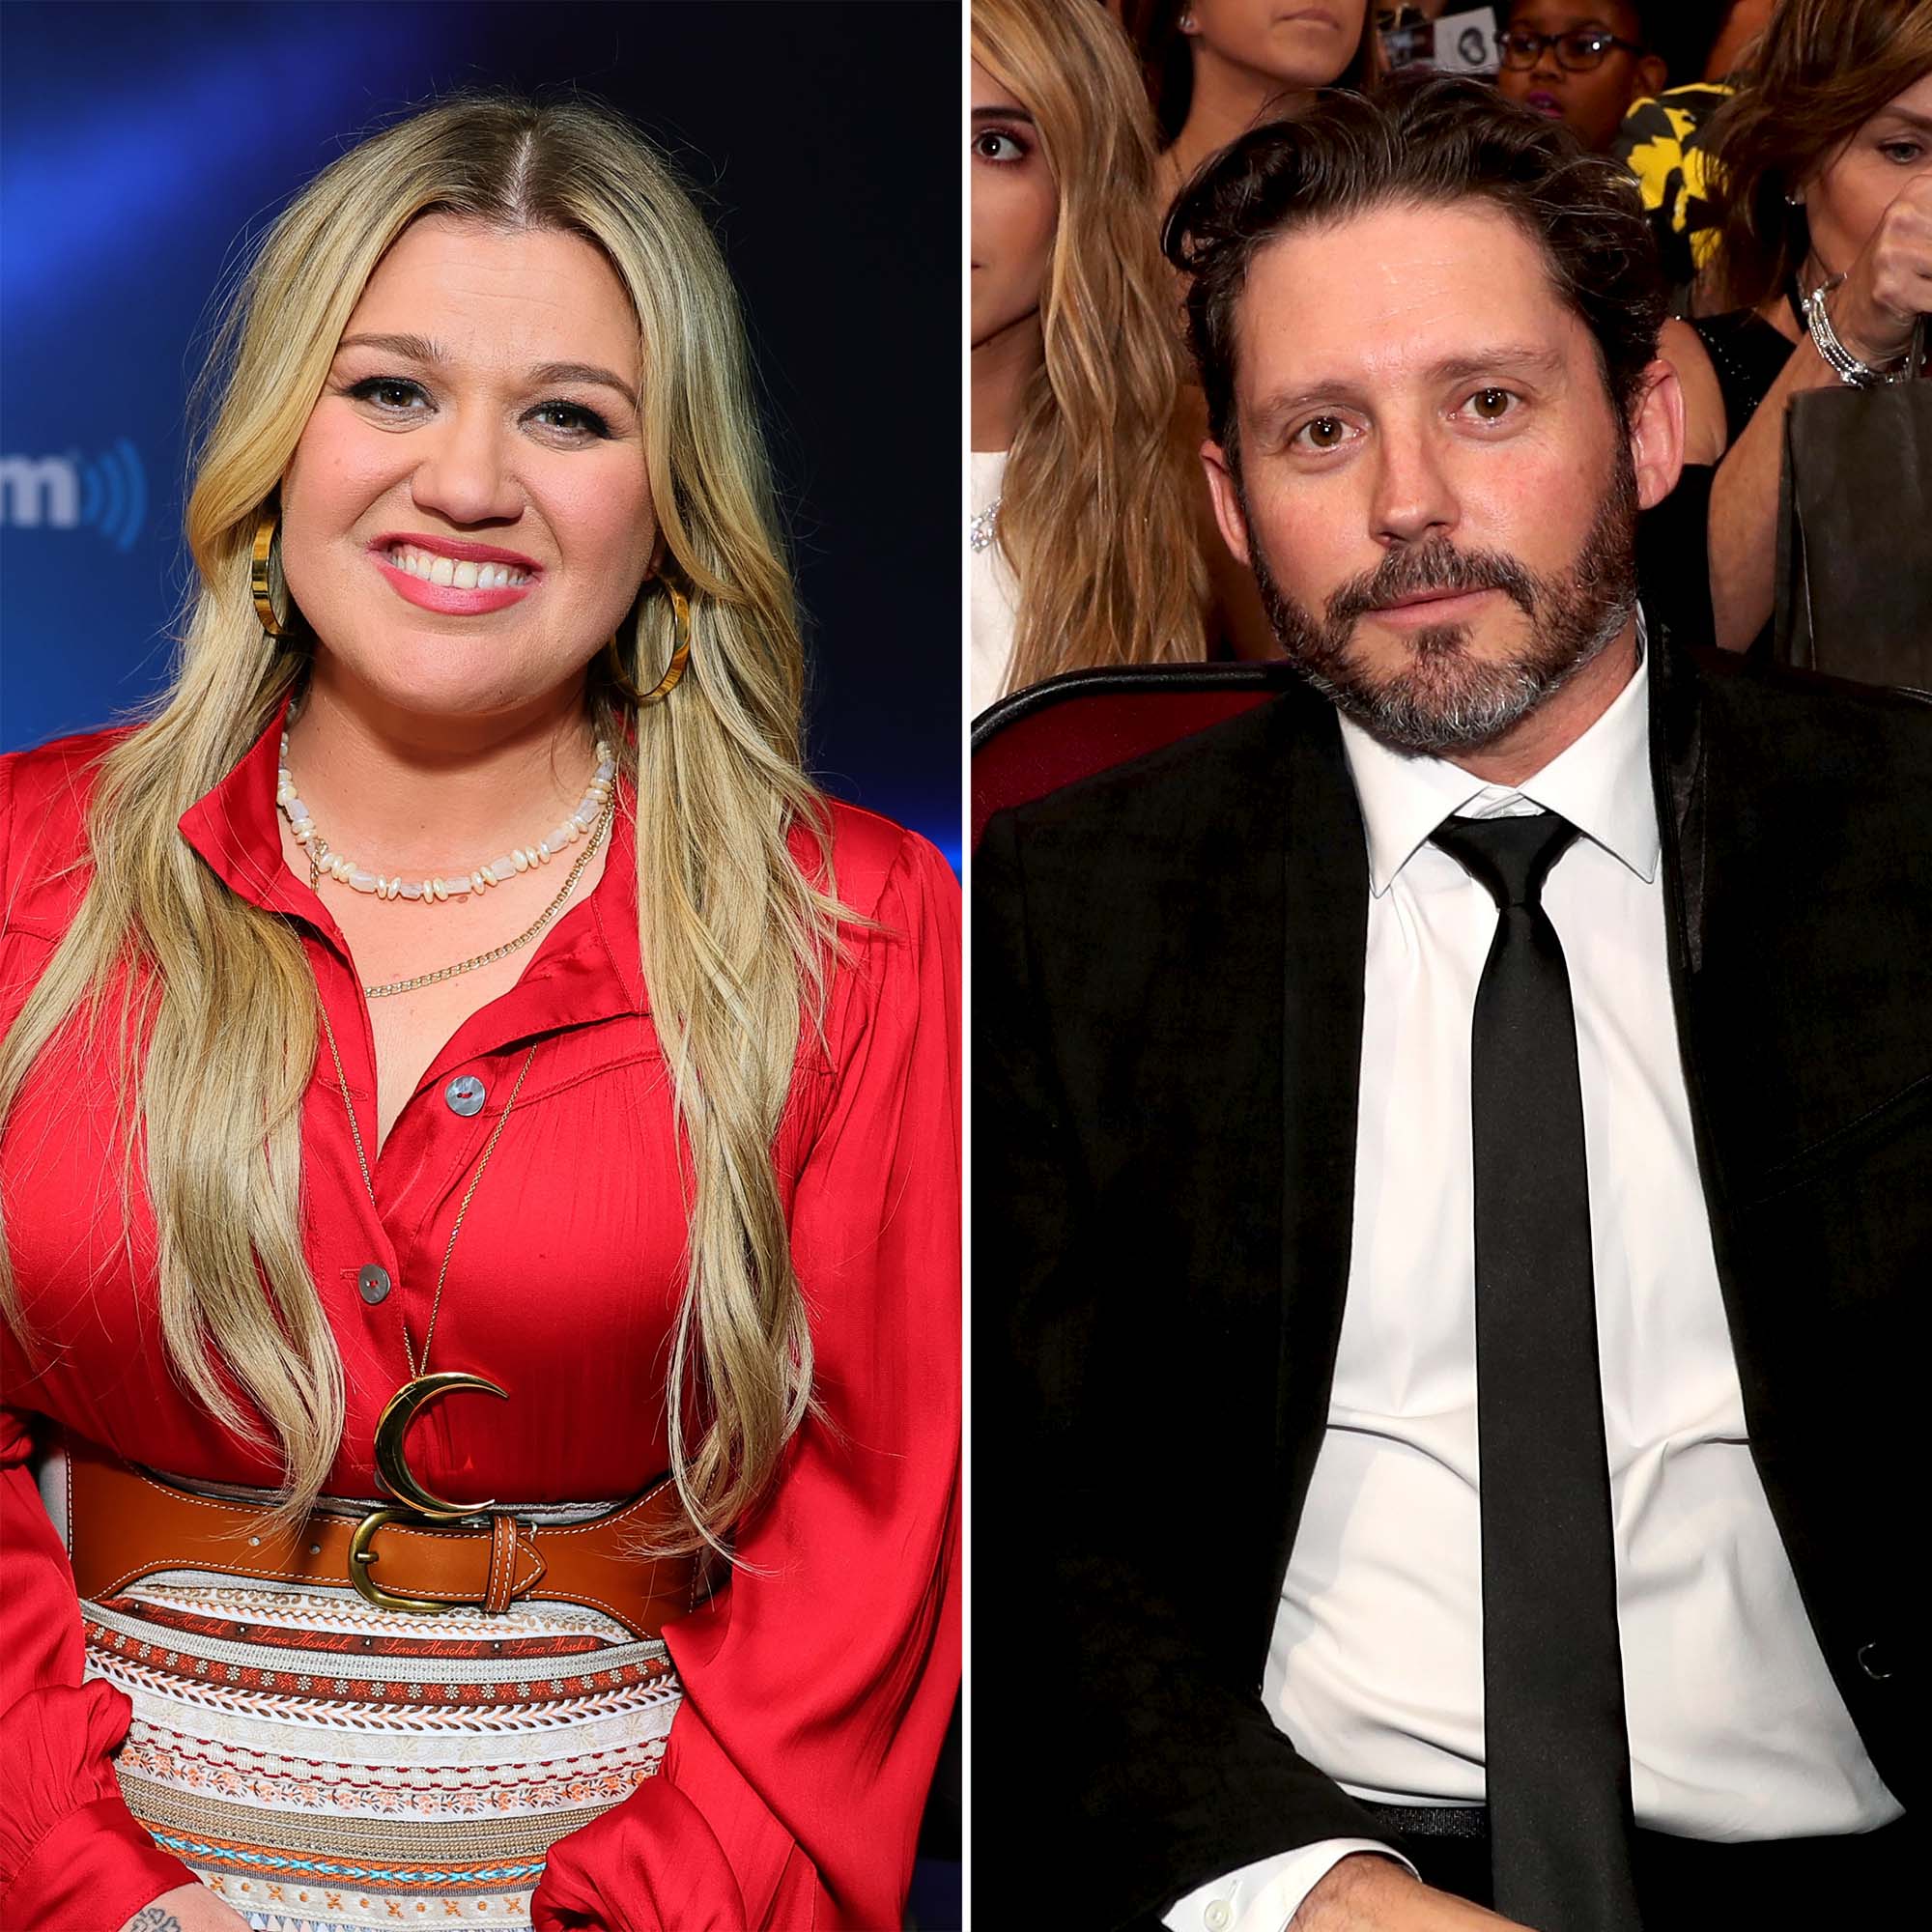 Kelly Clarkson 'Fighting' for What's 'Owed' With Brandon Blackstock Lawsuit